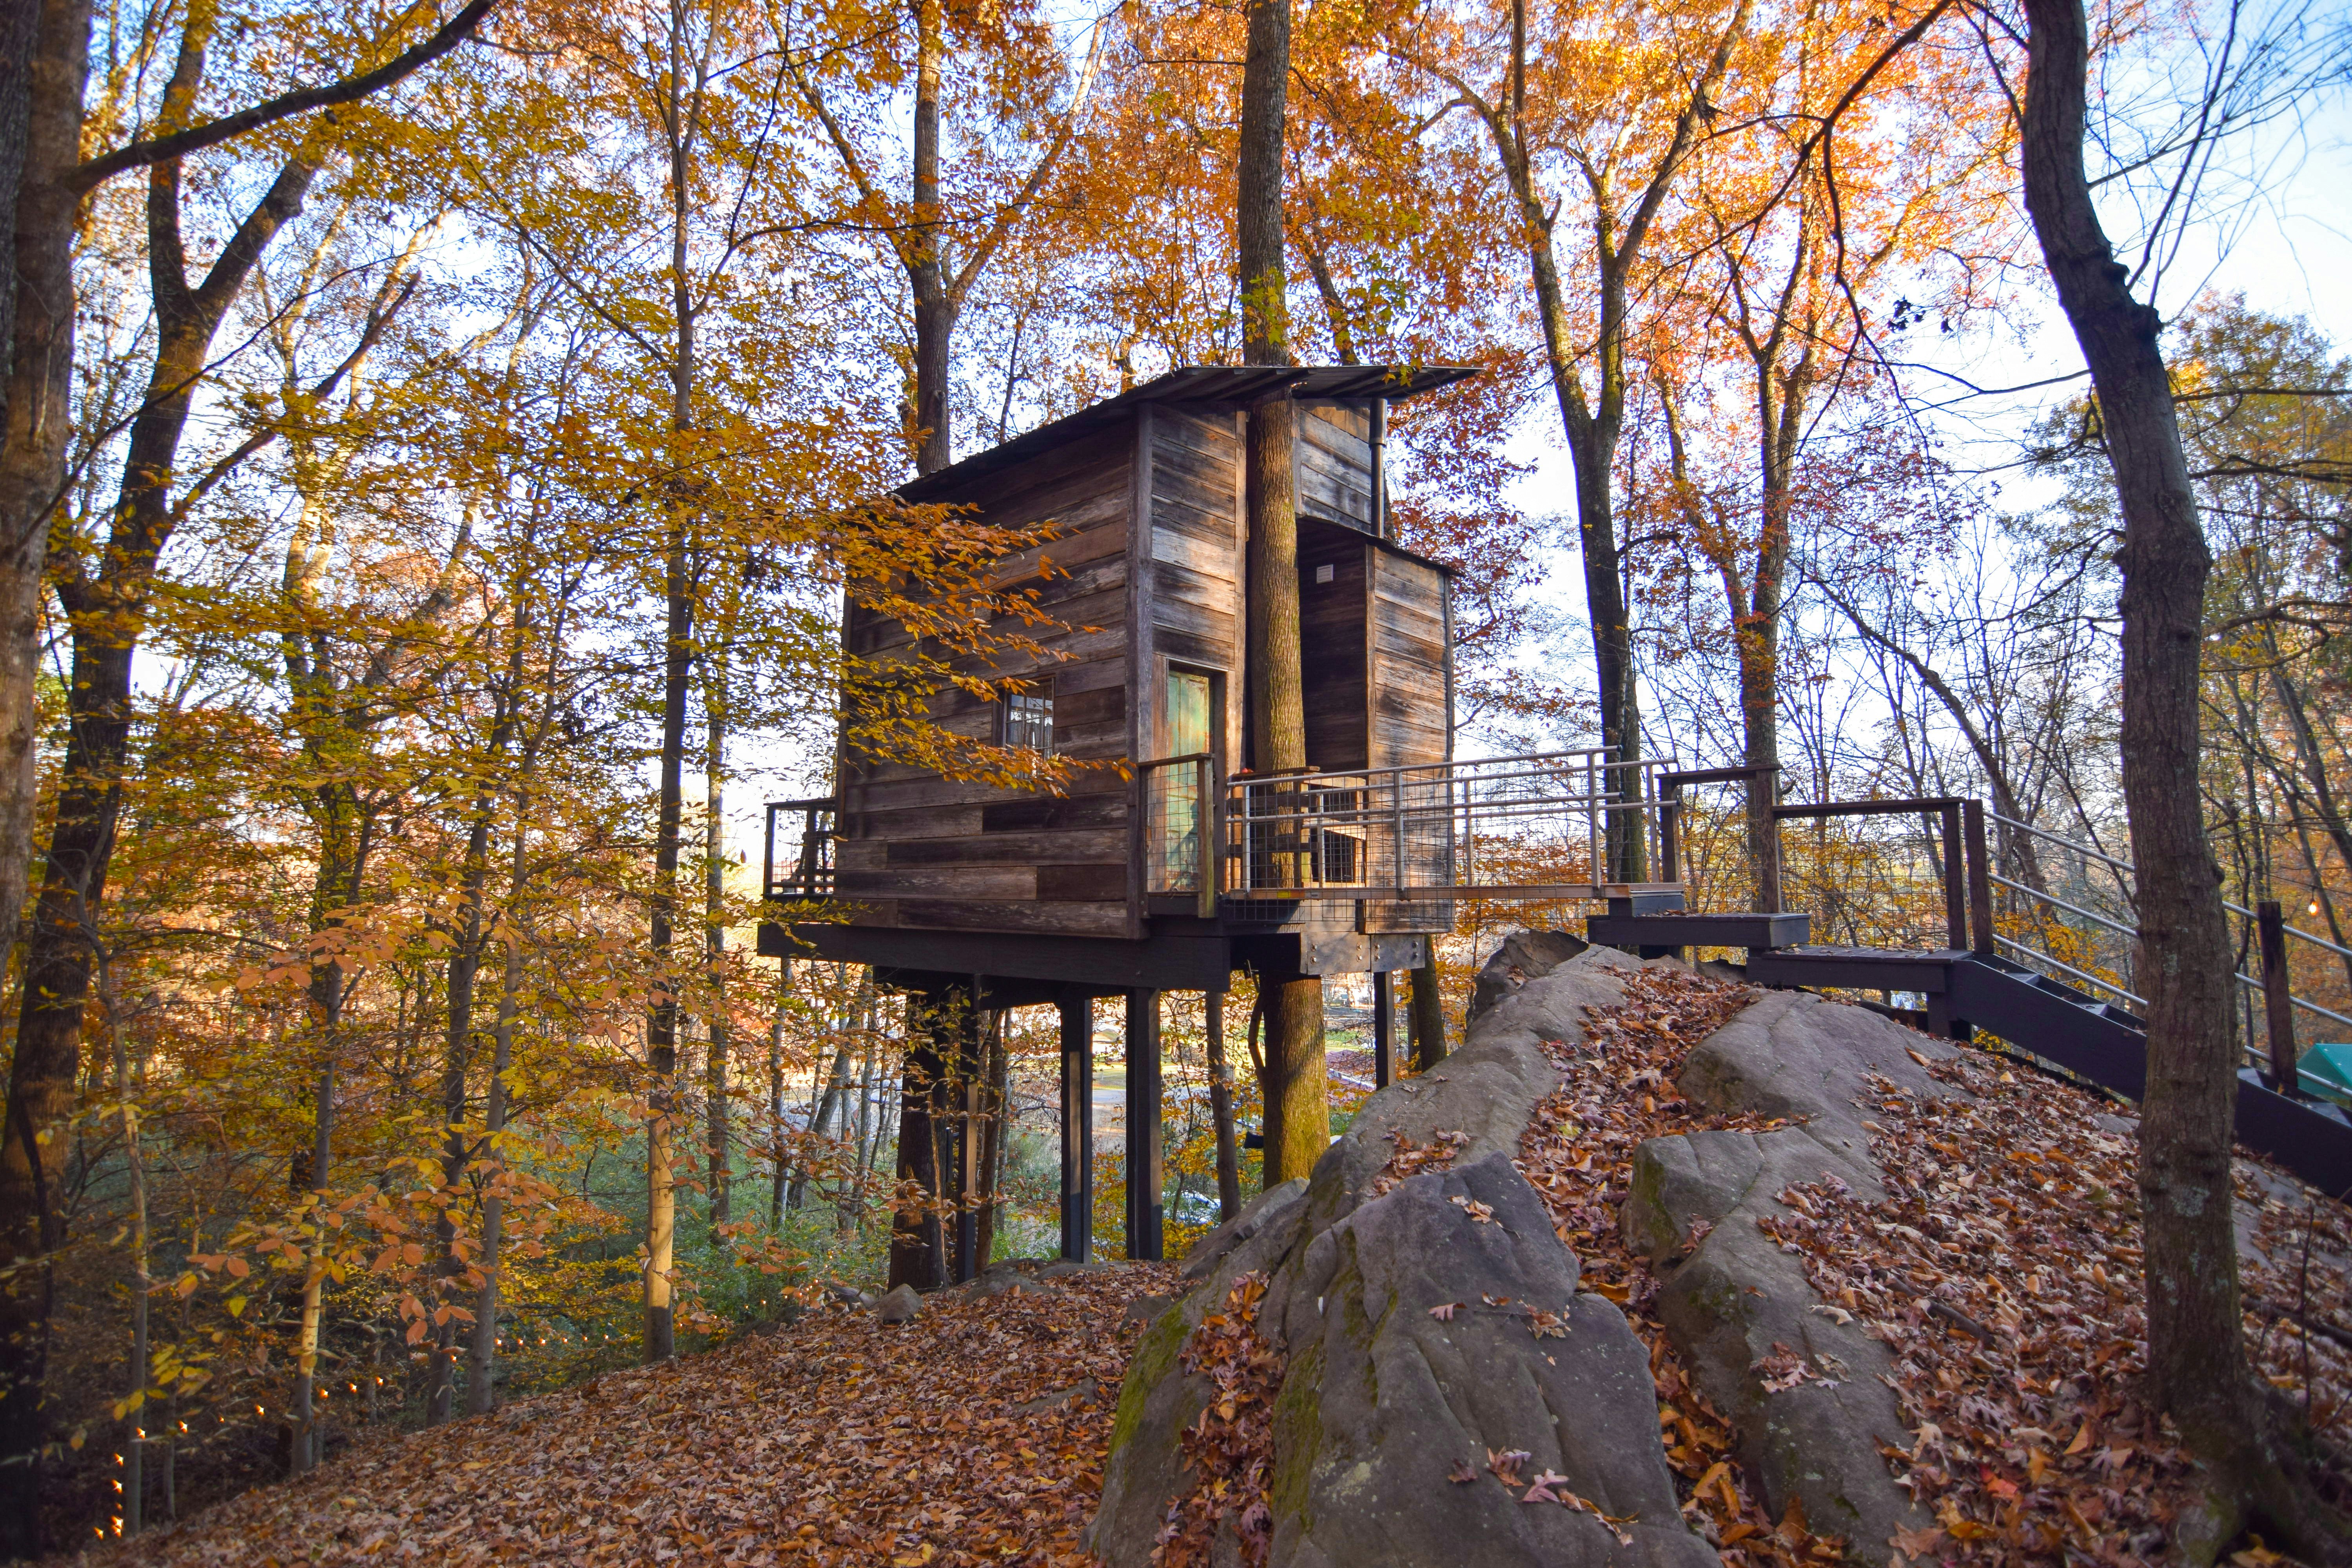 The warm rustic wood exterior of one of the Treetop Hideaways tree houses in Chattanooga, Tennessee